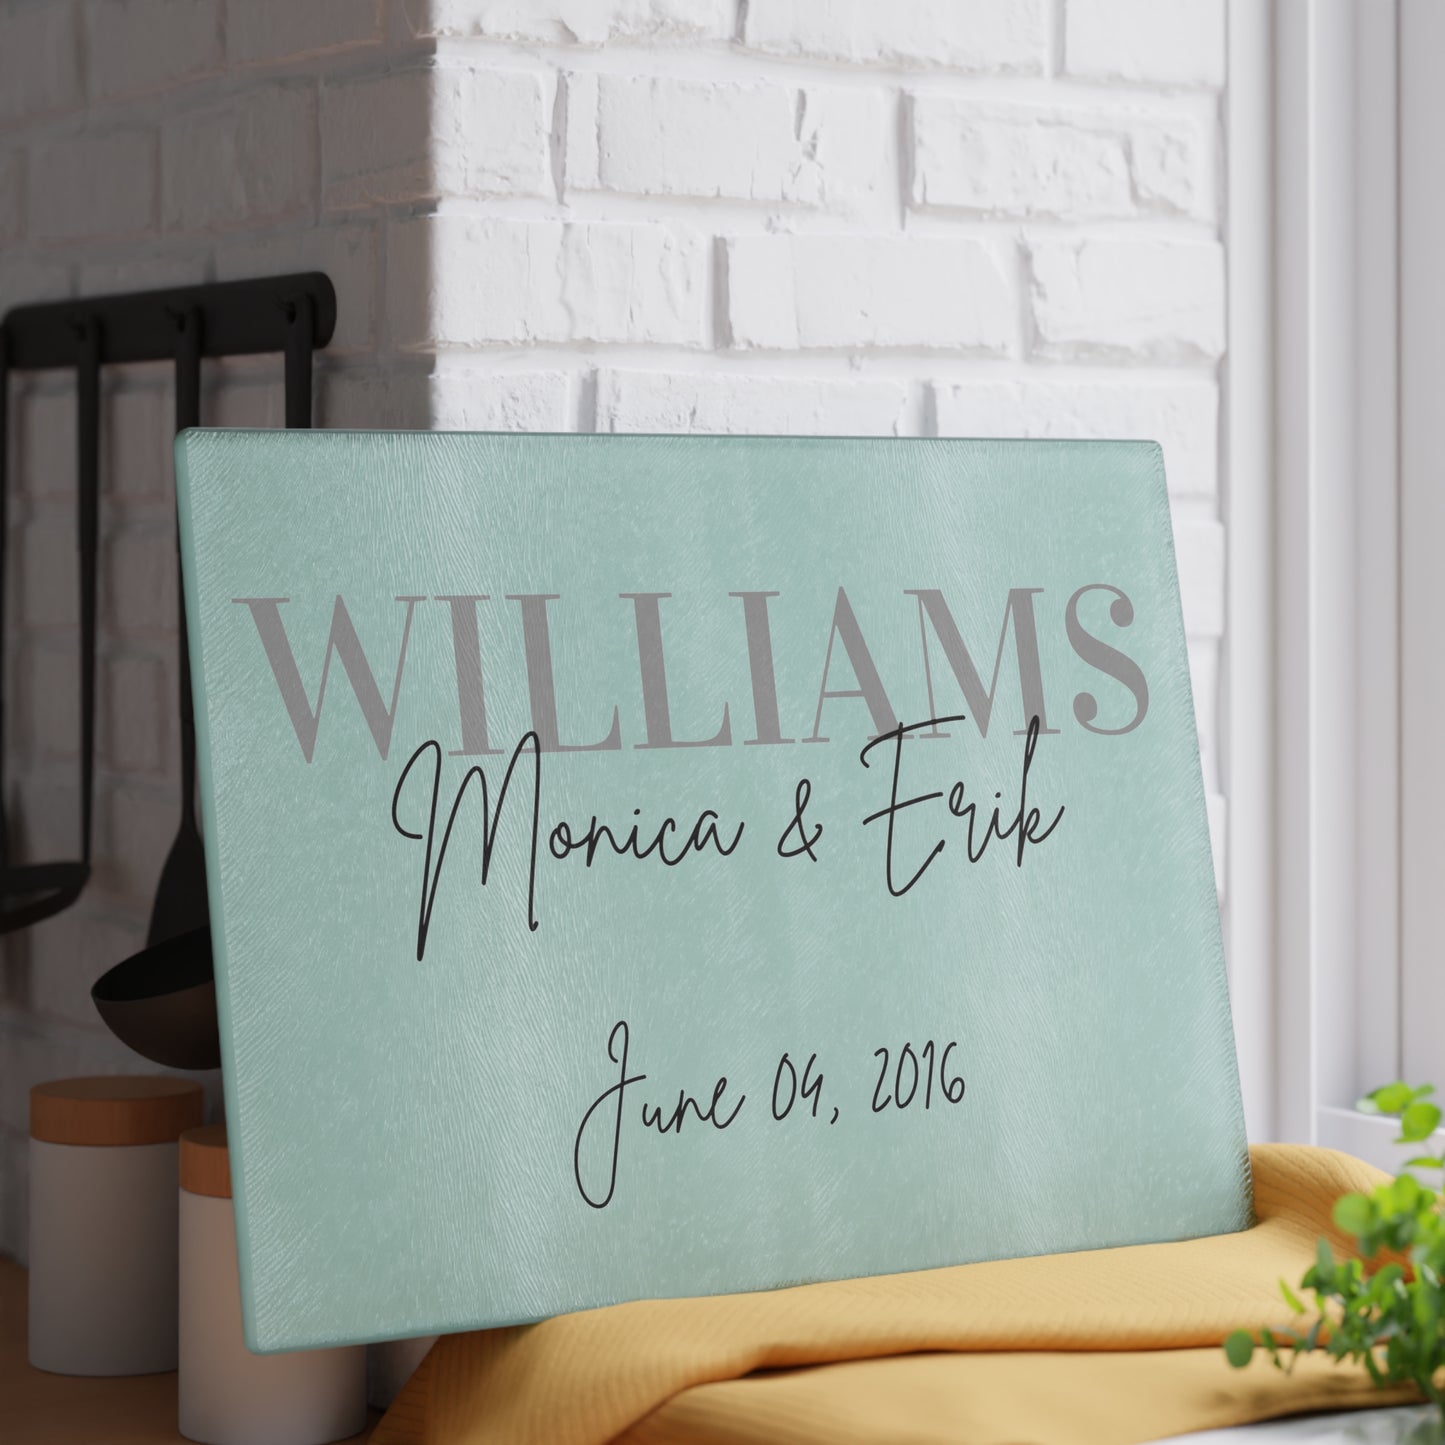 Personalized Glass Cutting Board Wedding Gift Home Decor Brides by Emilia Milan 